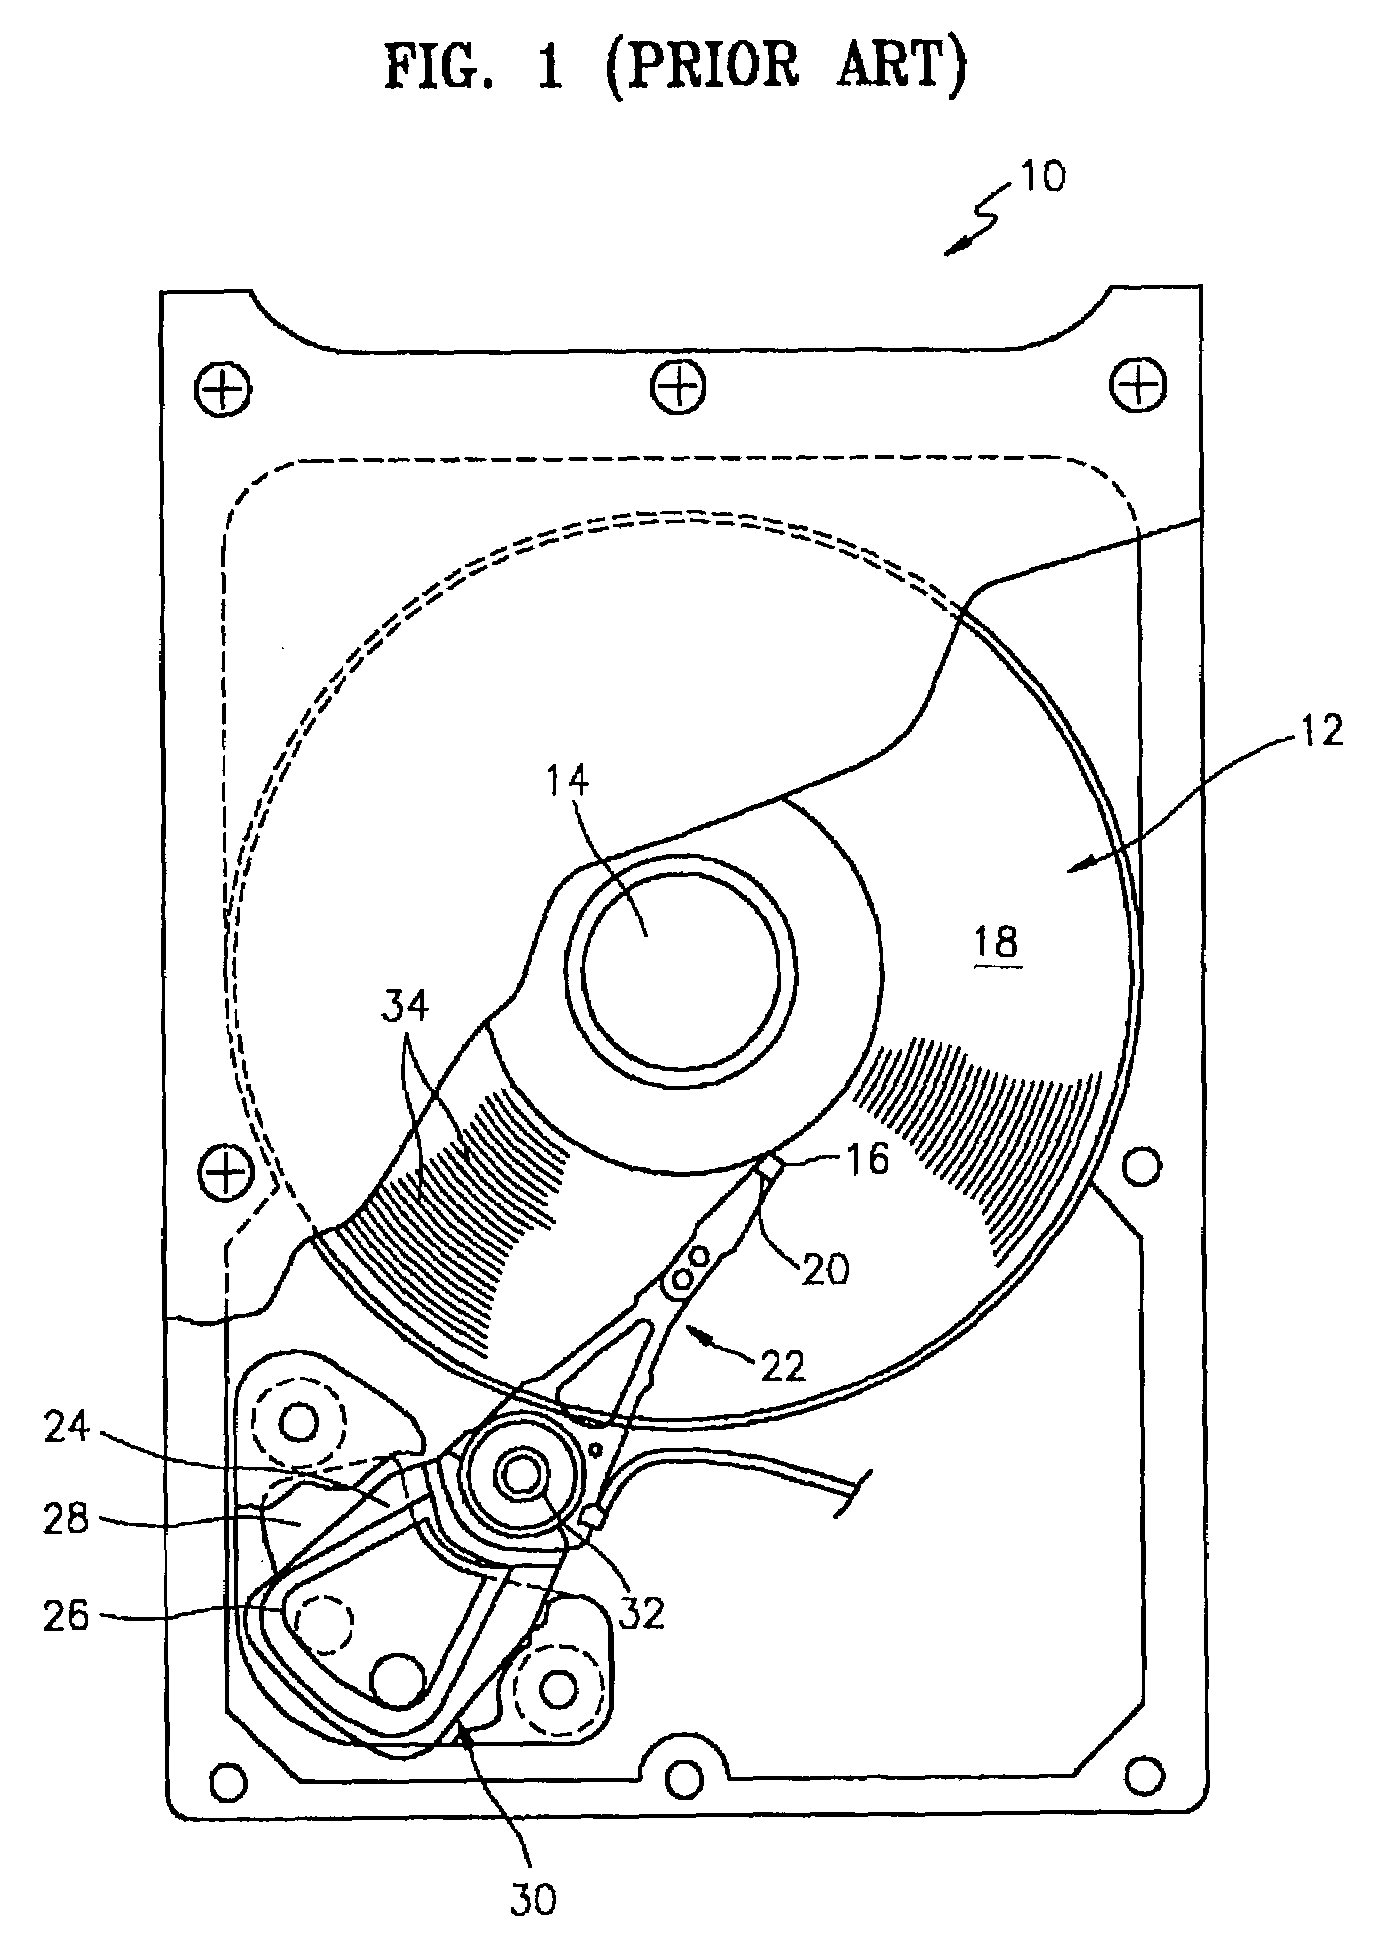 Settling servo control method and apparatus for hard disc drive and method and apparatus for estimating acceleration constant of voice coil motor actuator suitable for the settling servo control method and apparatus